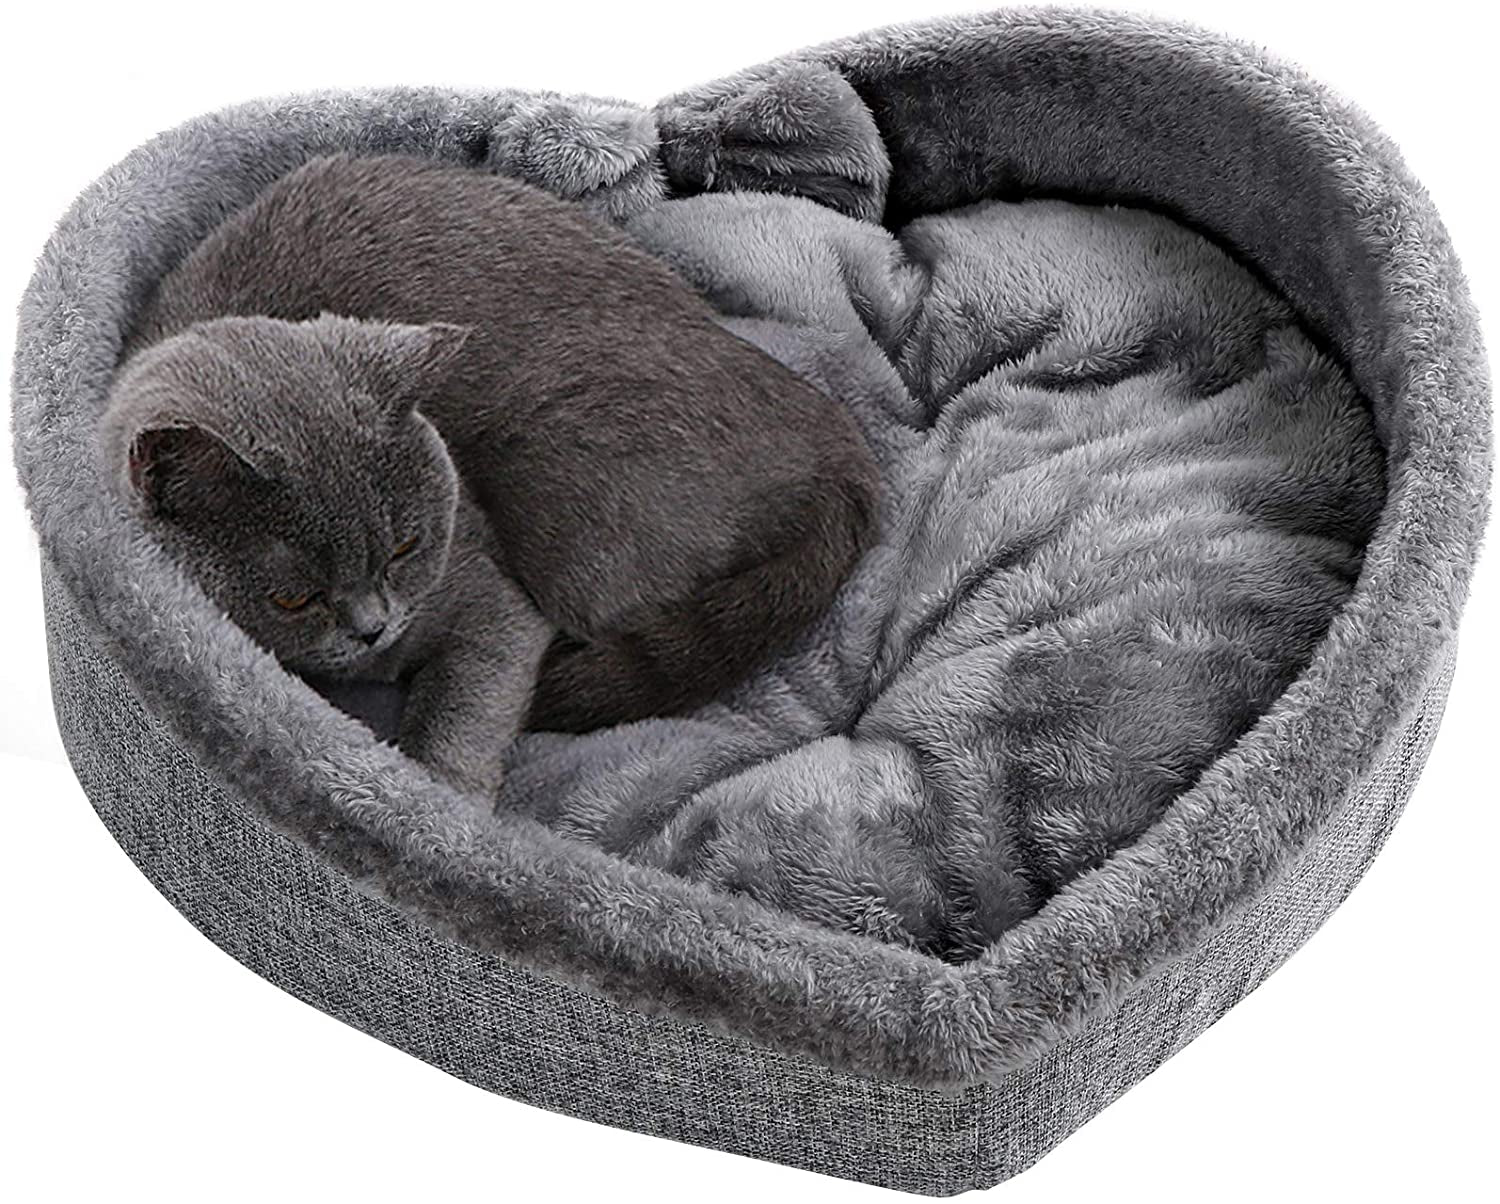 Love Nest for Your Furry Valentine: Heart-Shaped Cat Pet Bed with Ultra Soft Short Plush, Anti-Slip Bottom, and Washable High Resilience PP Cotton – Ensuring Comfortable, Self-Warming Sleep for Your Cozy Kitty in Autumn and Winter!